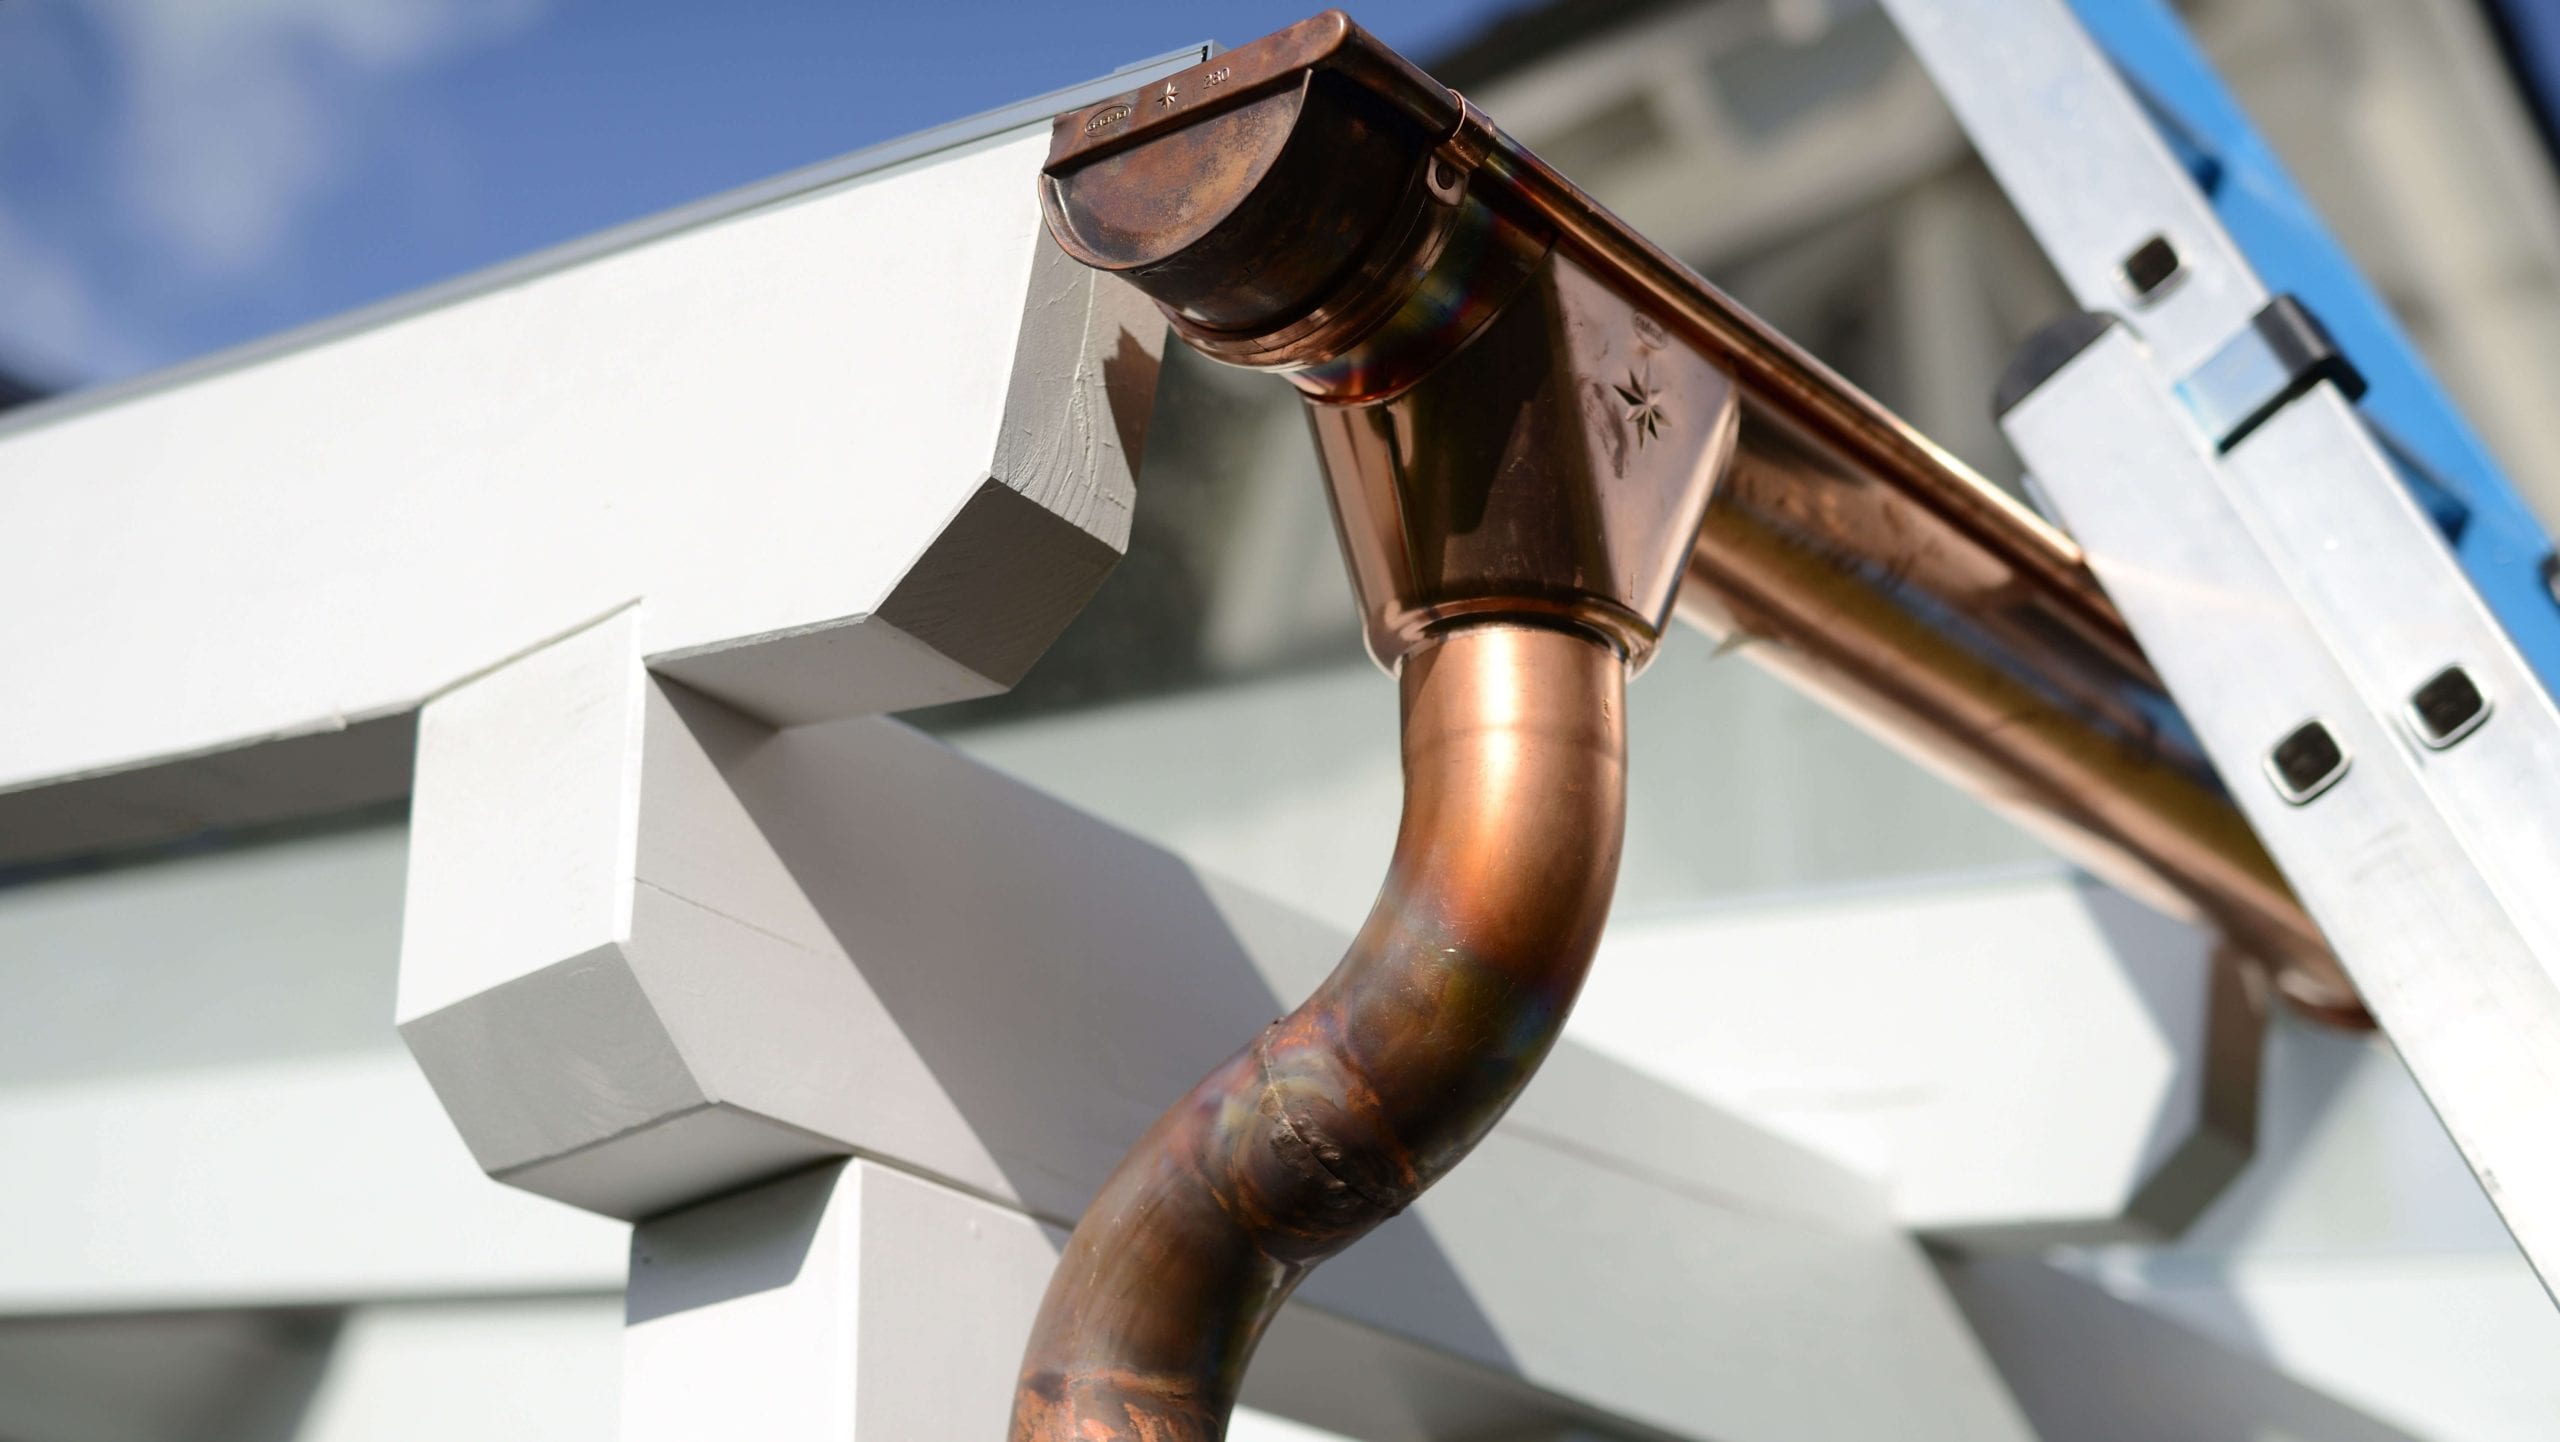 Make your property stand out with copper gutters. Contact for gutter installation in Georgetown